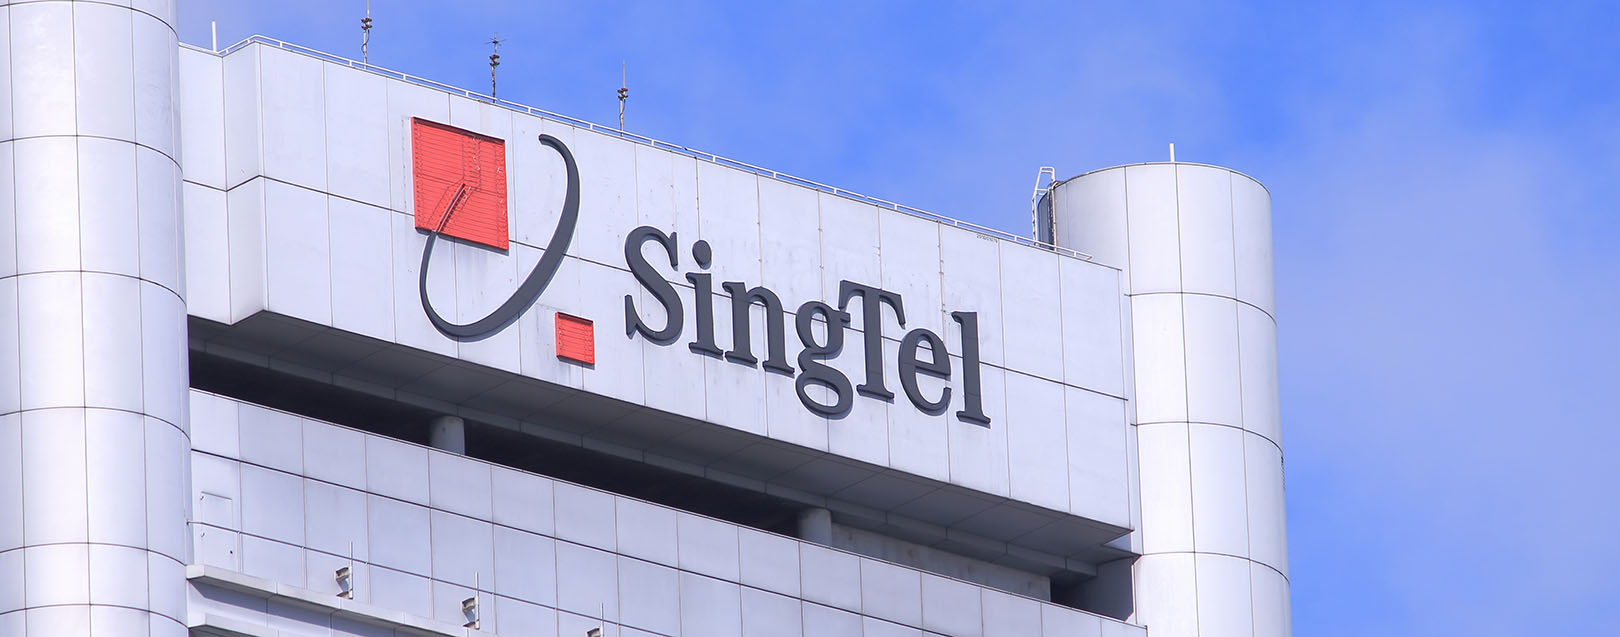 Singtel to acquire 7.39% more stake in Bharti Telecom for $659 million  